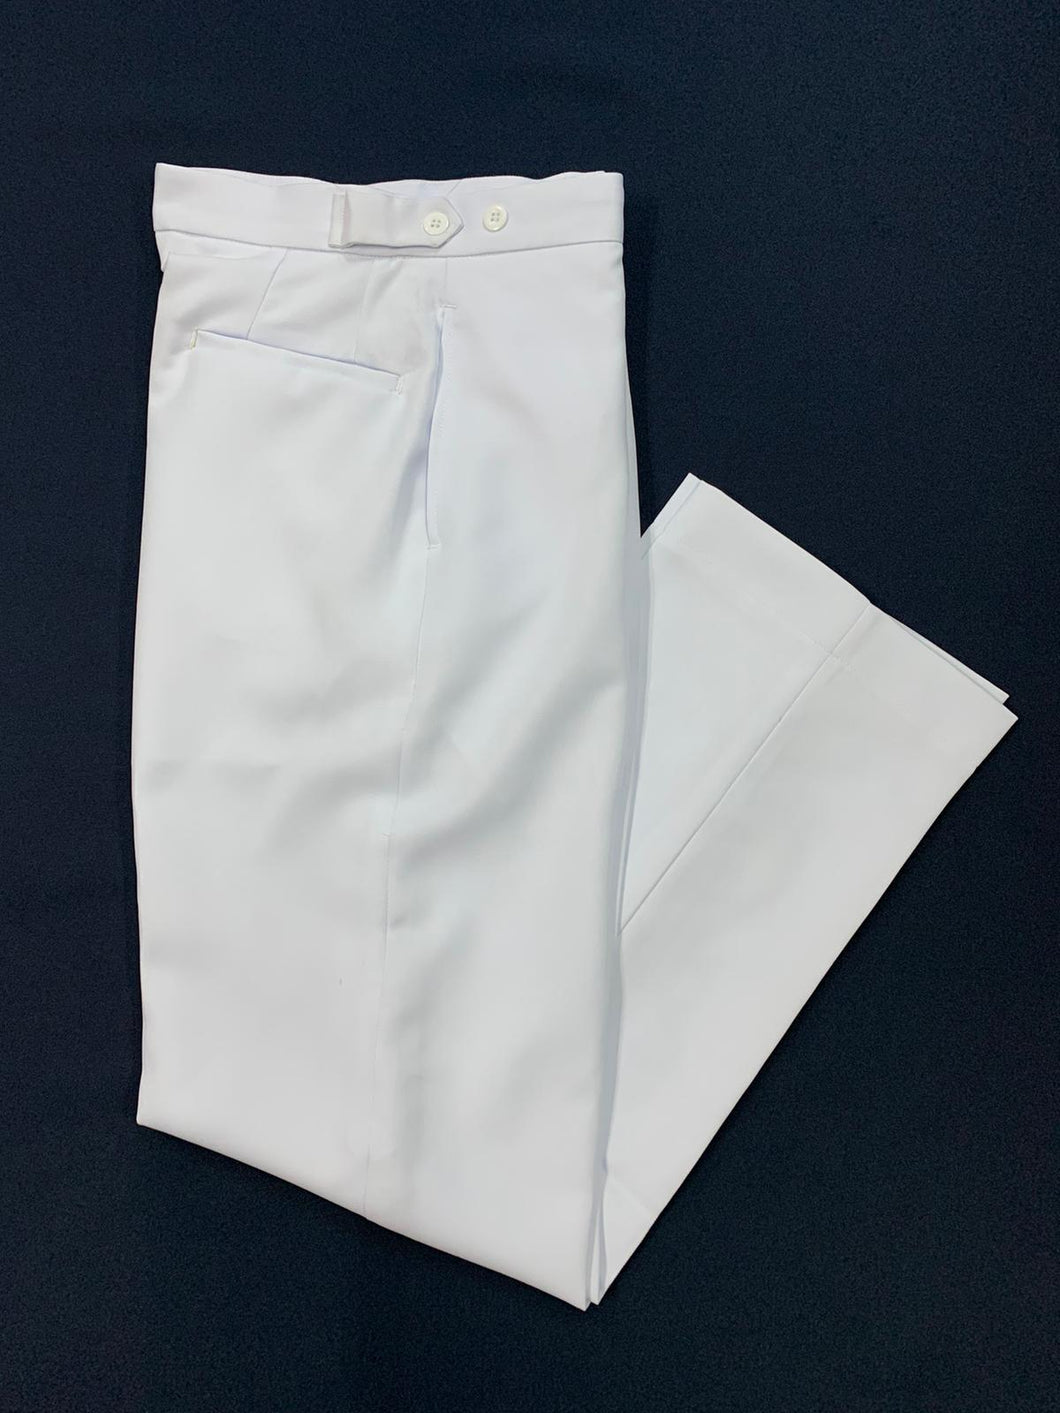 Zhonghua Long Pants / Trousers (Secondary 3 and above only)